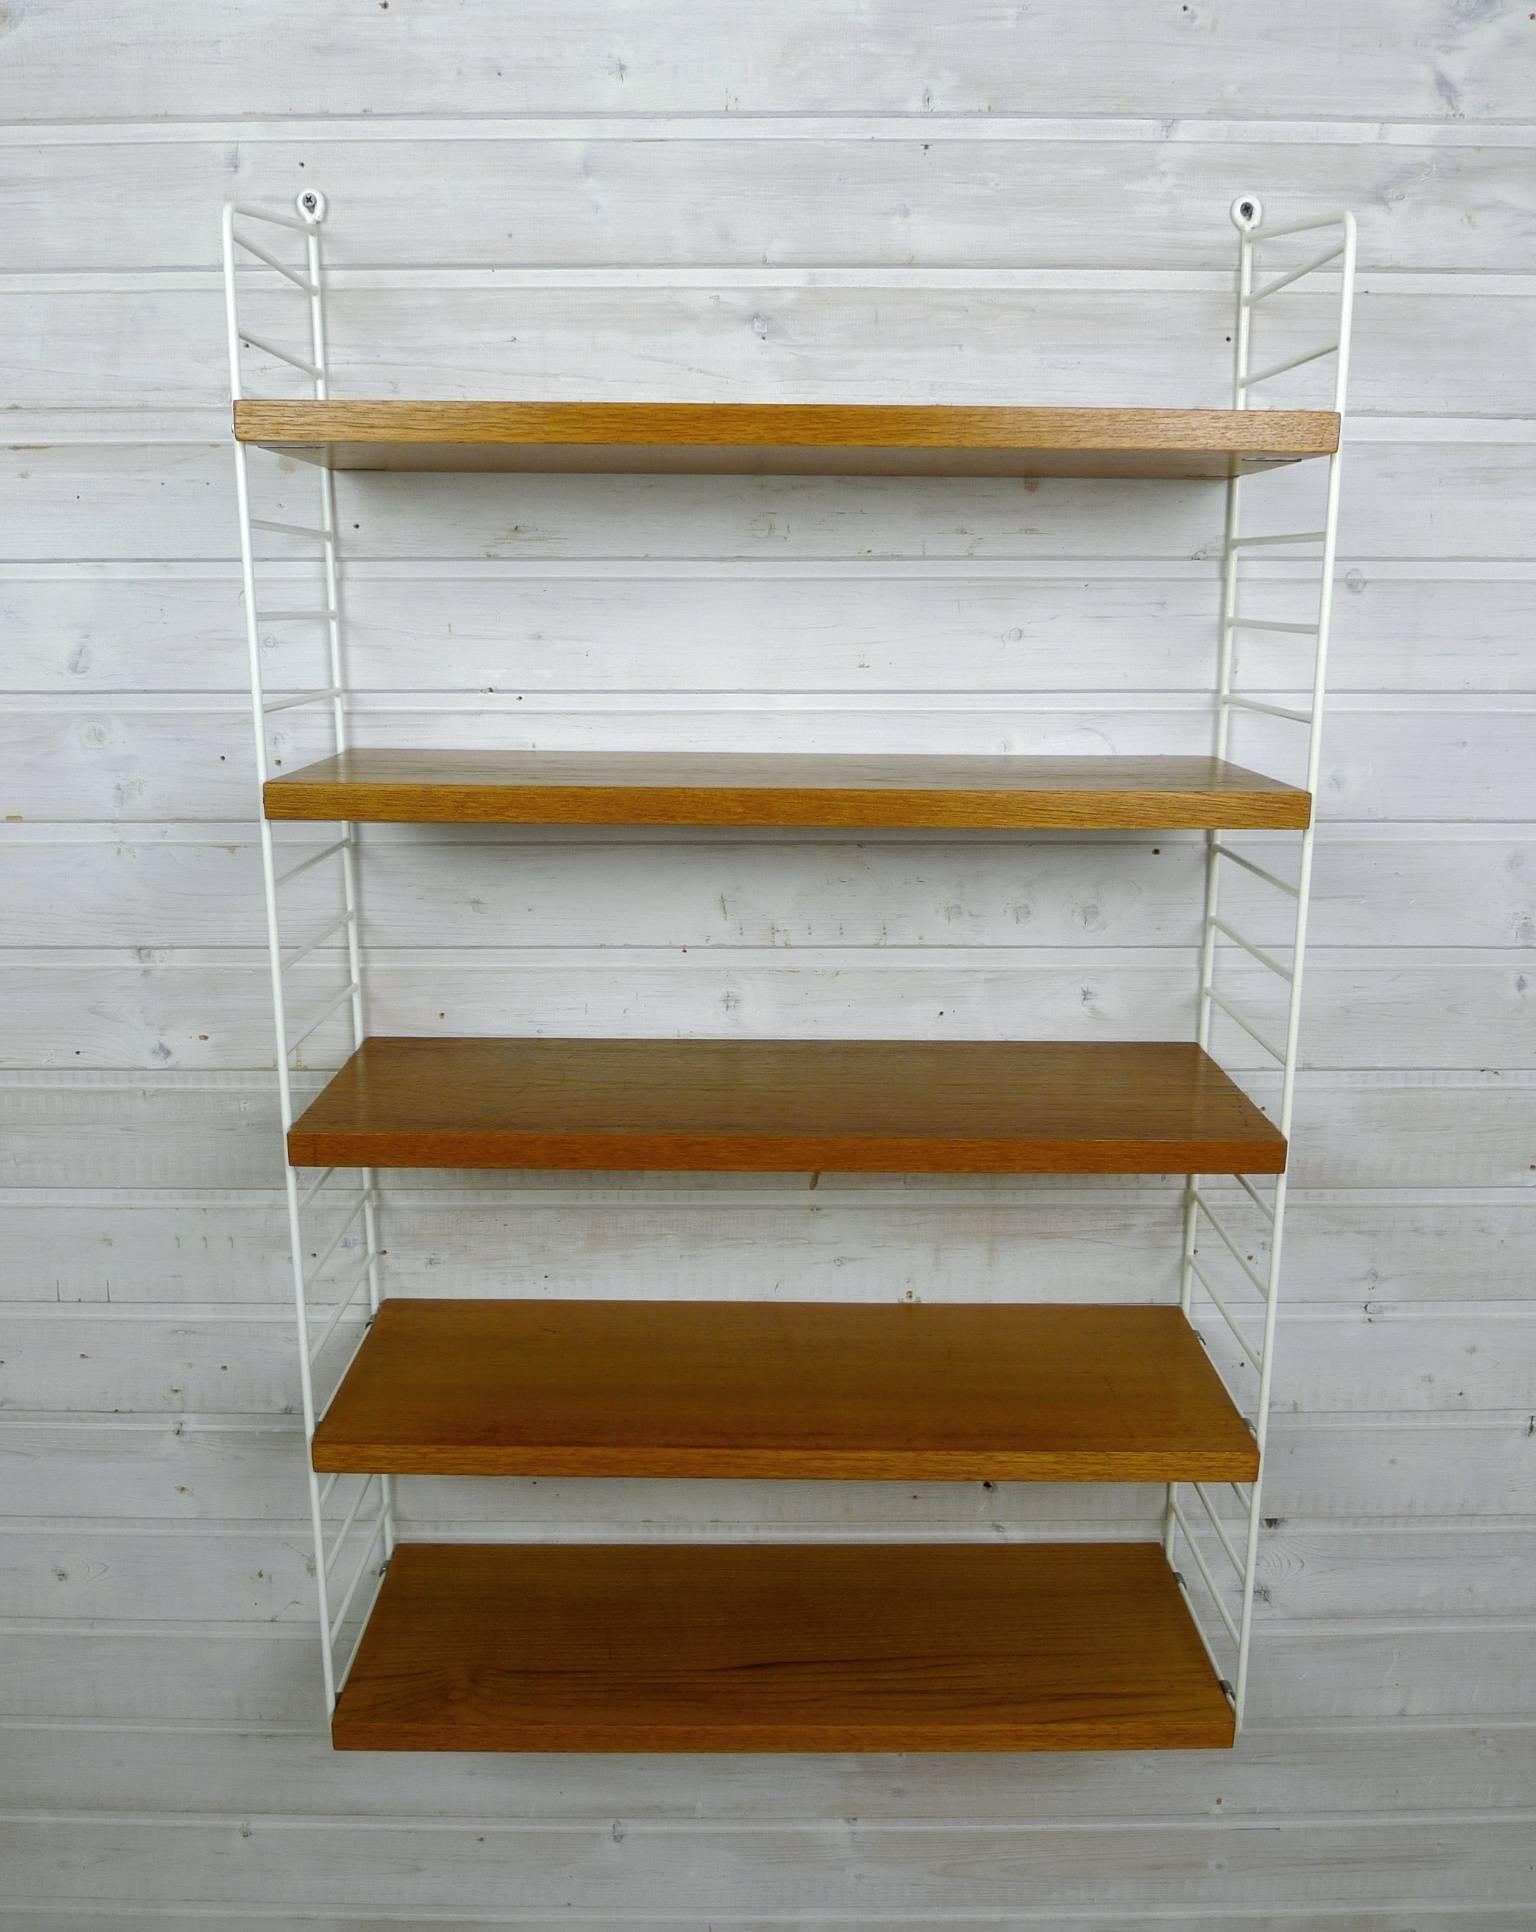 Nisse Strinning designed his famous shelf system in 1949. It was produced in his own company String Design AB in Sweden.
This wall shelf consists of two white-coated ladders and five shelves in teak with a depth of 20 cm. The shelf is in a good